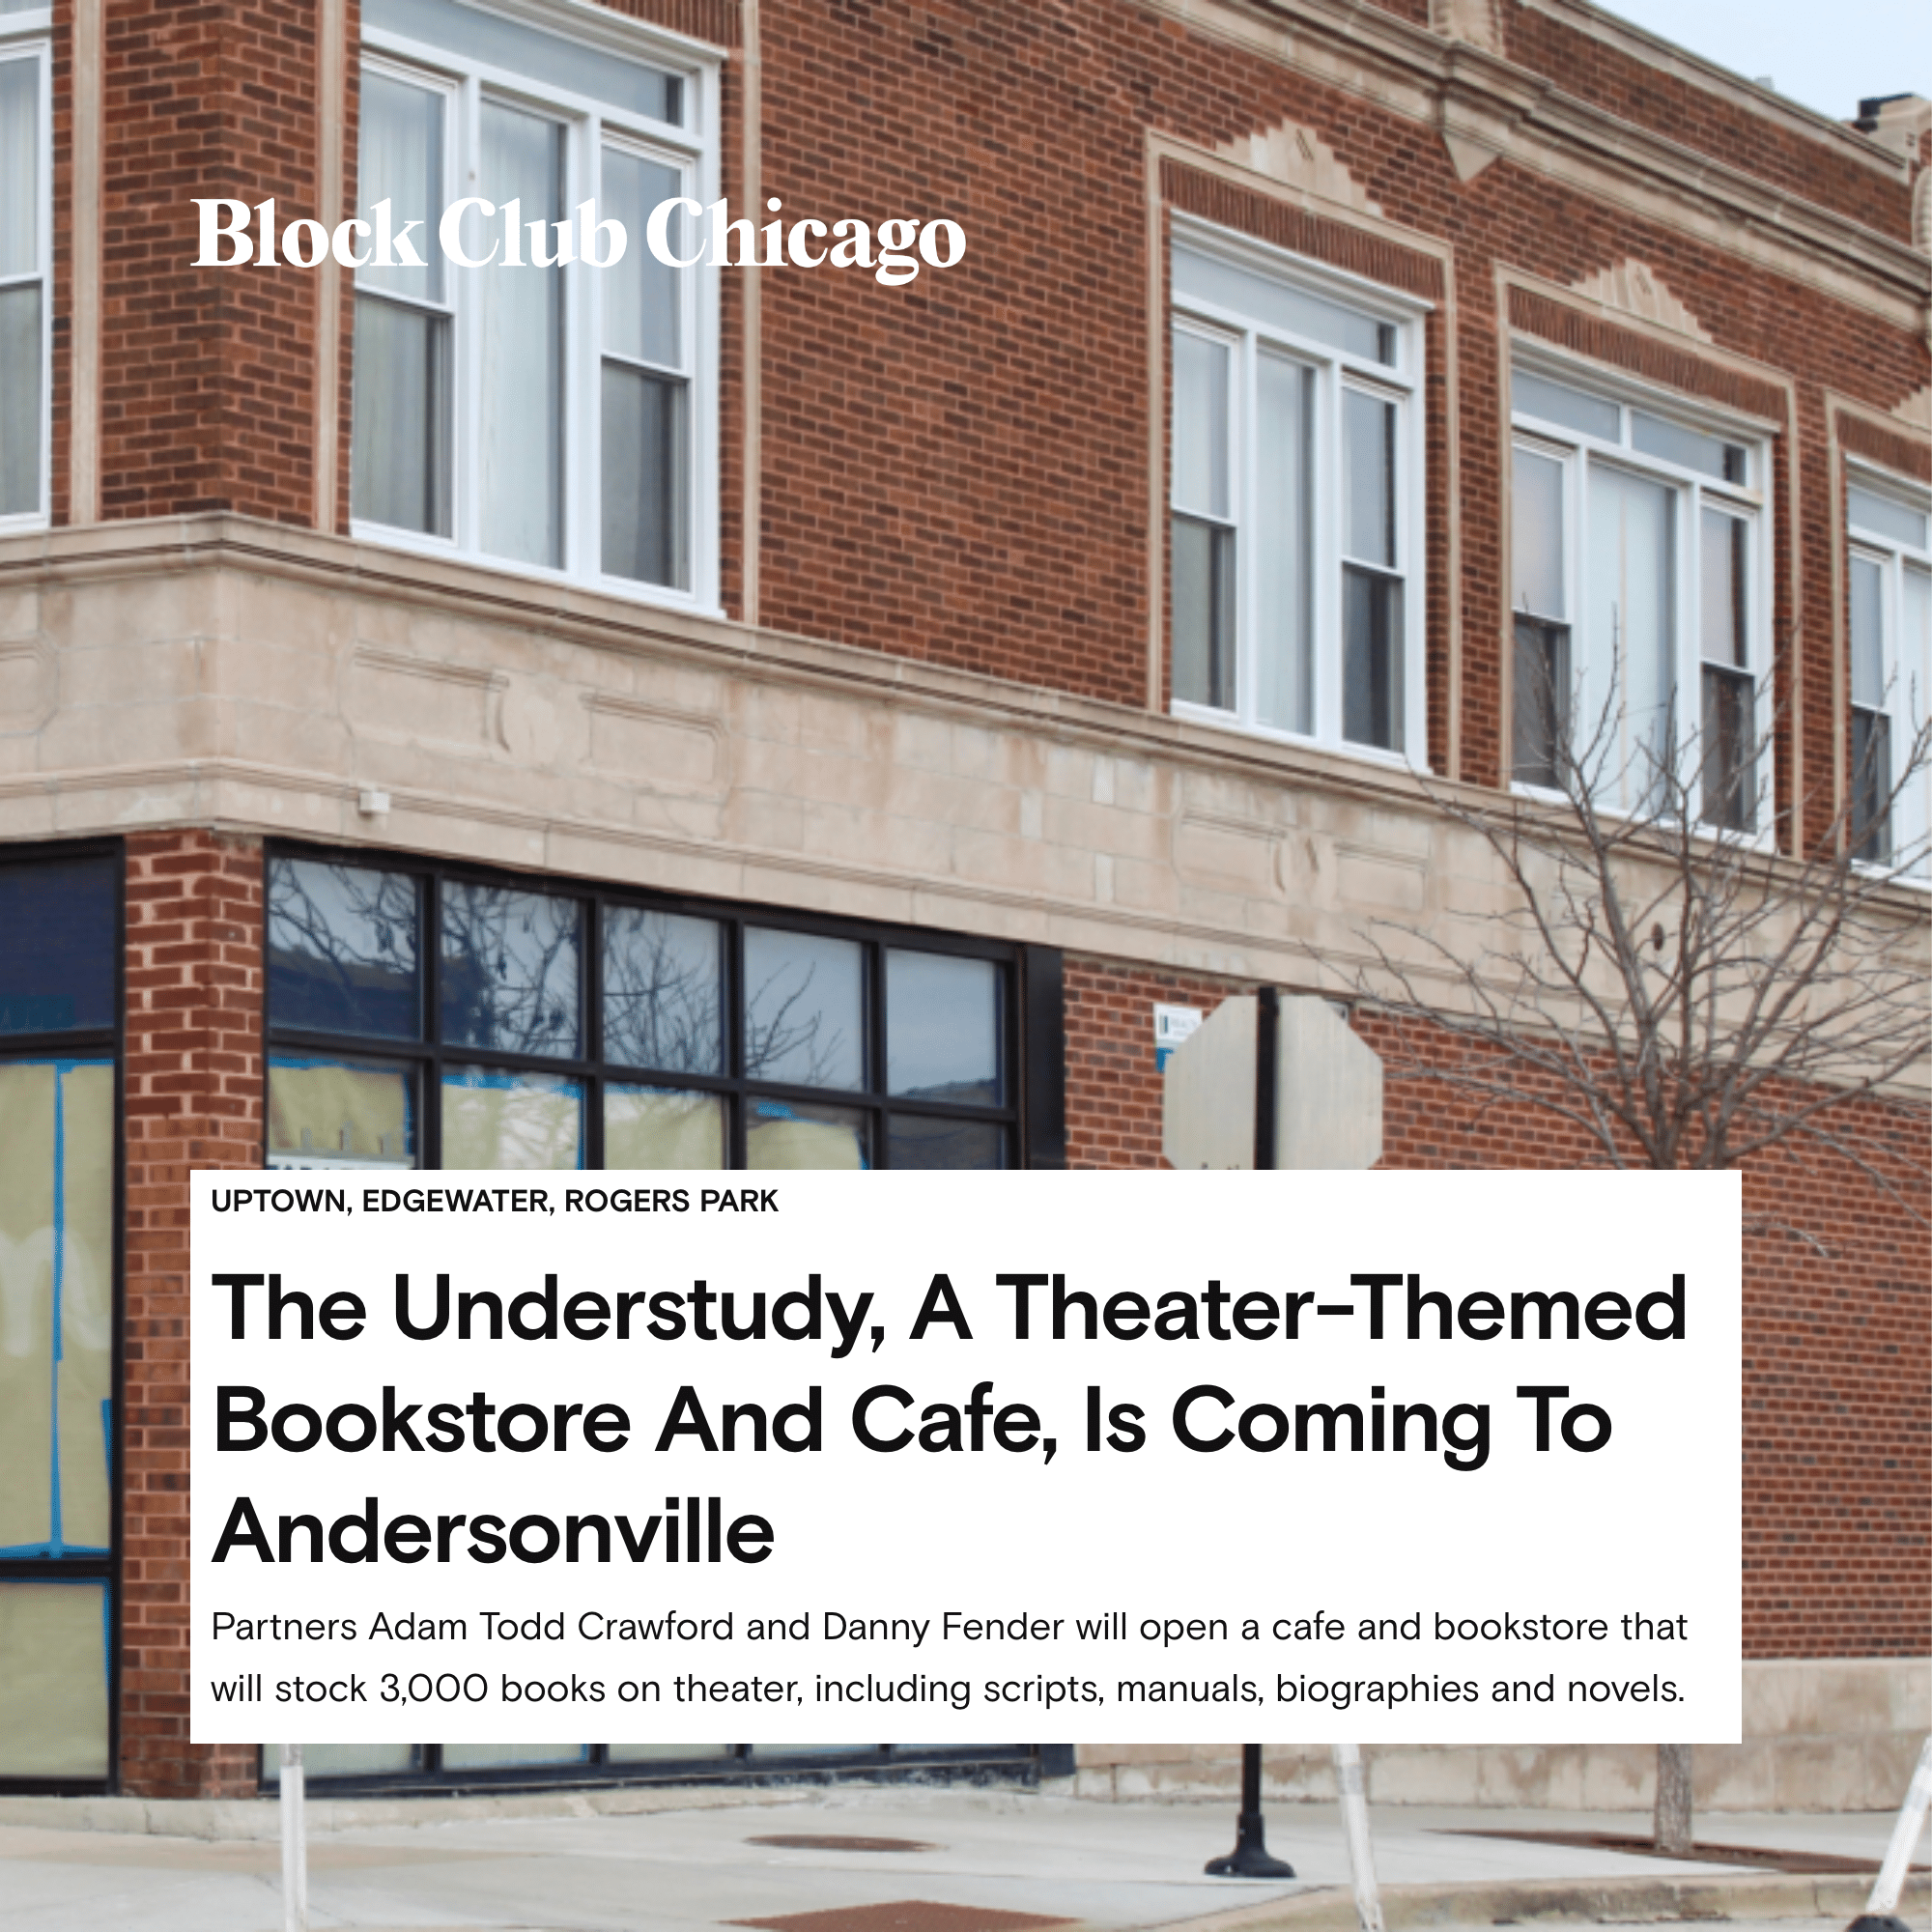 The Understudy, A Theater-Themed Bookstore And Cafe, Is Coming To Andersonville